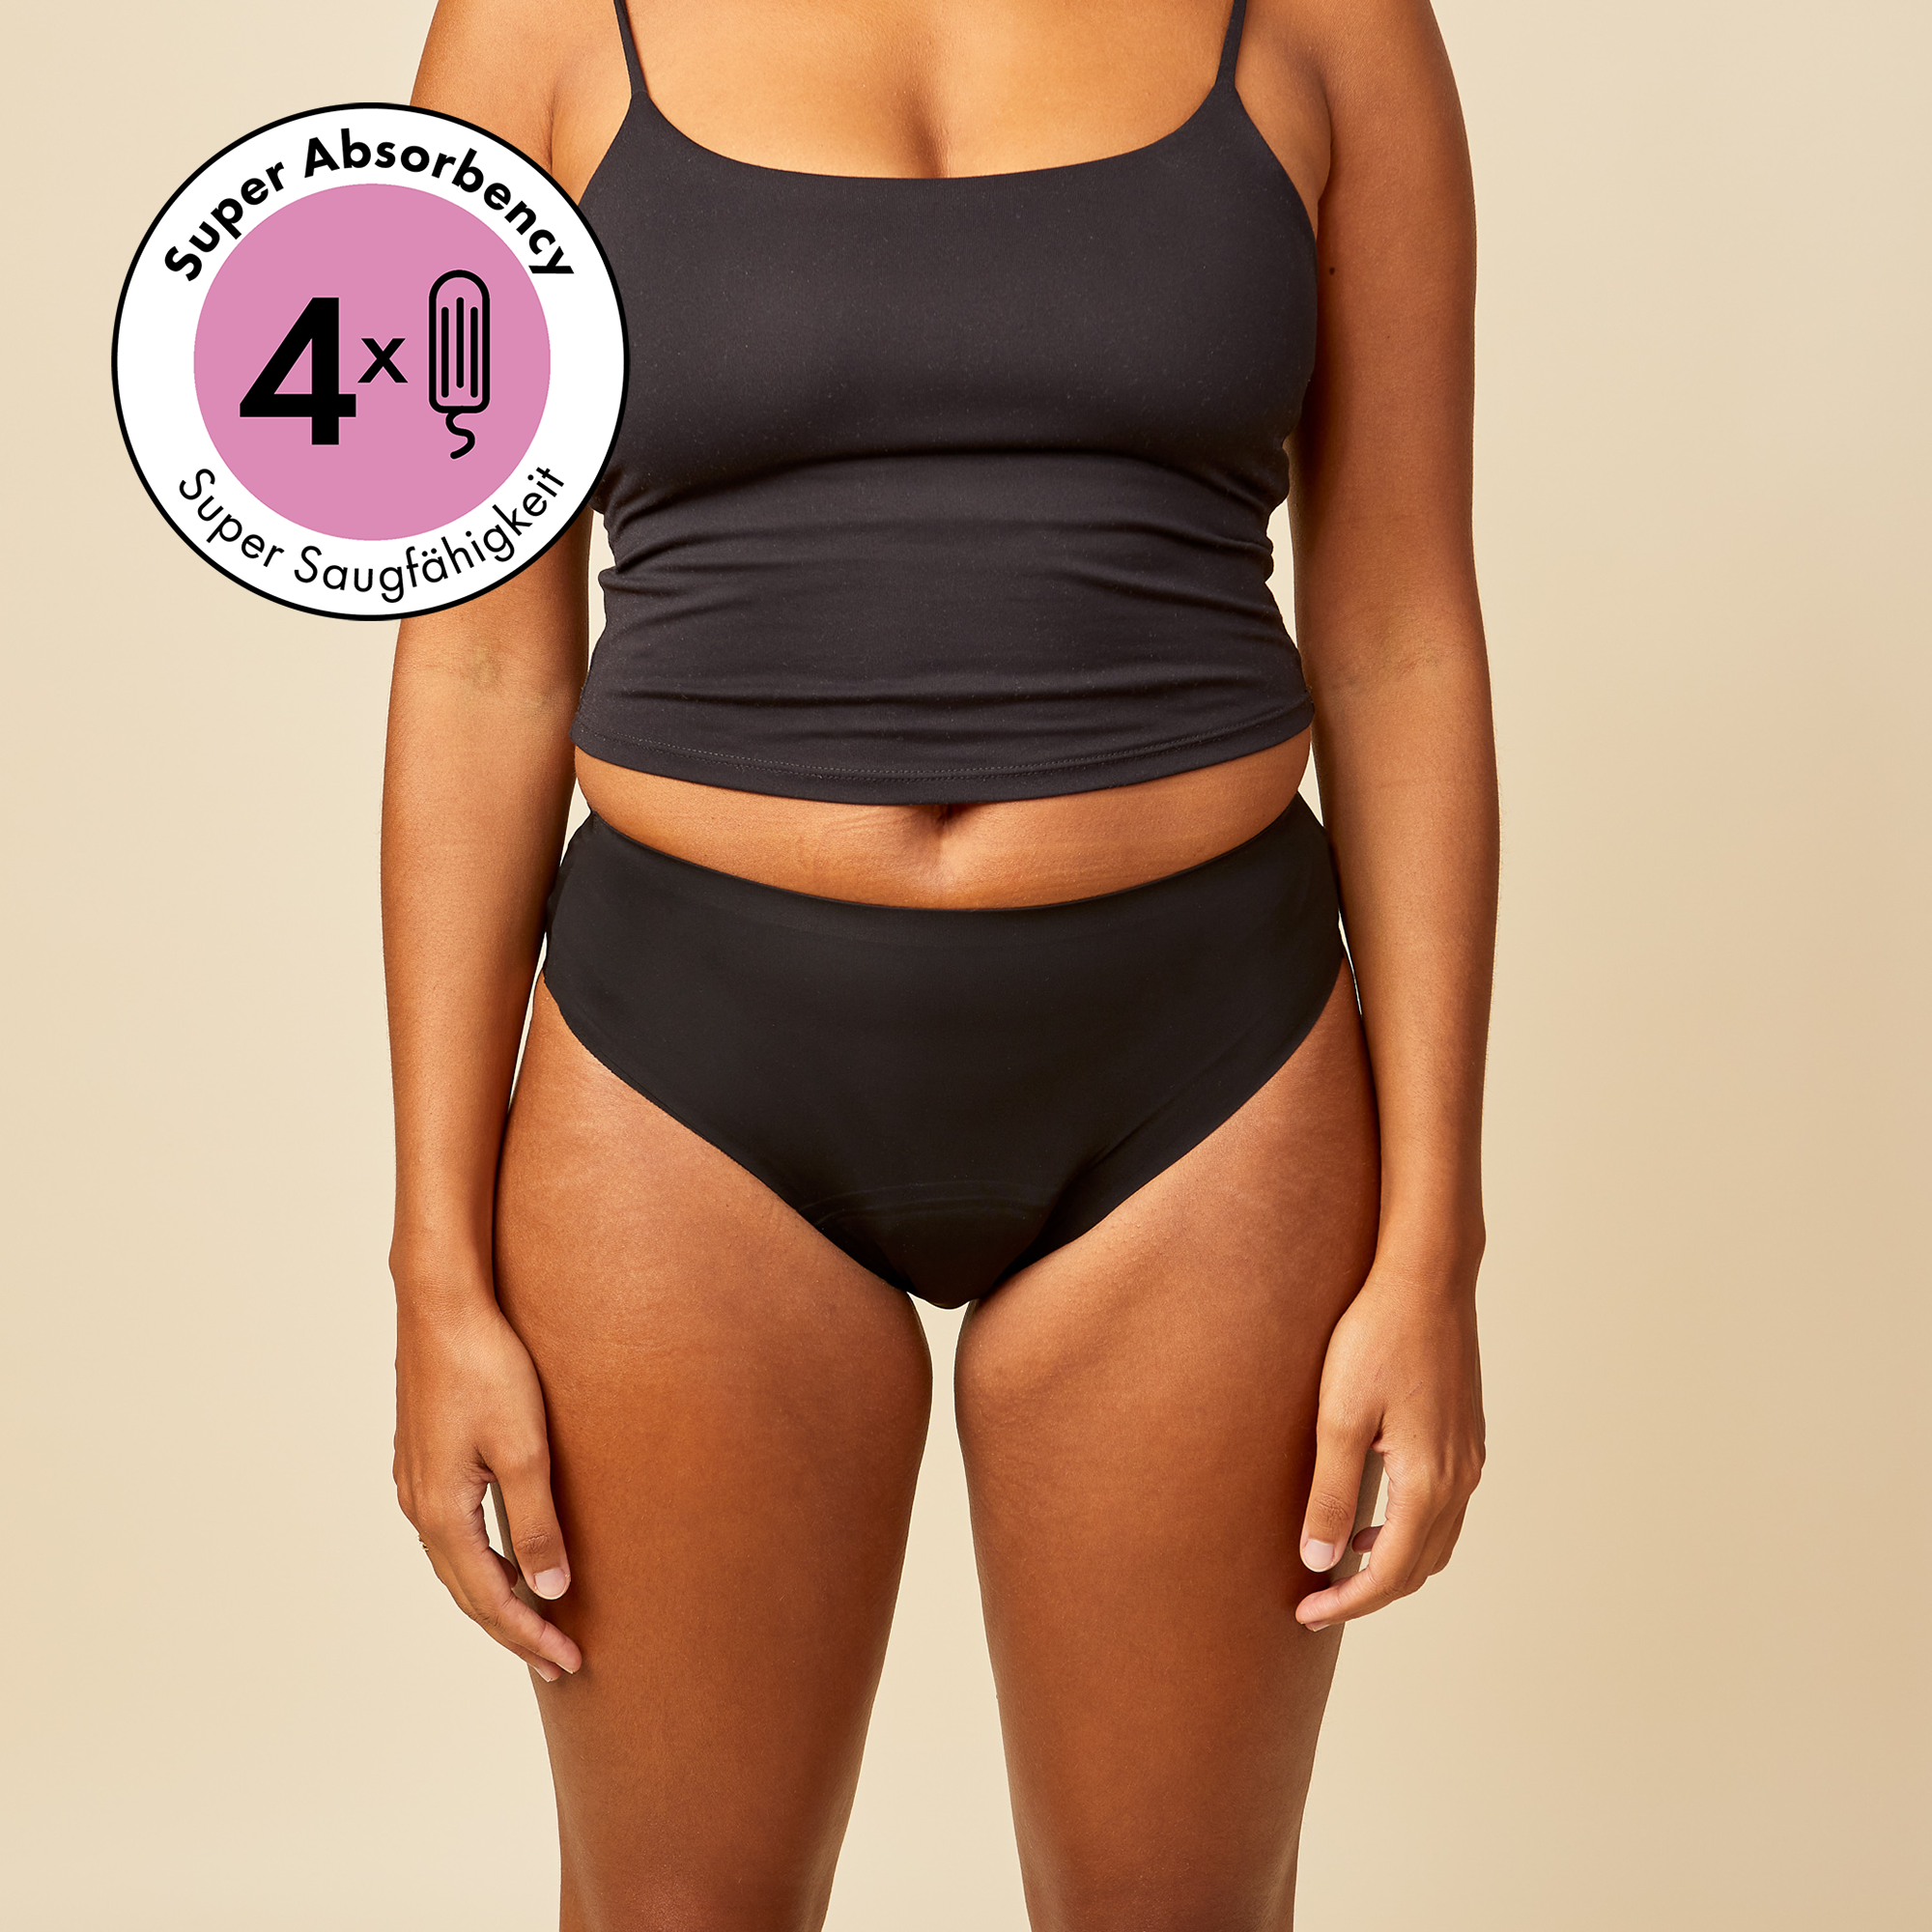 dais period underwear in cheeky cut black worn by a model shown from the front. Super absorbency of up to 4 tampons.